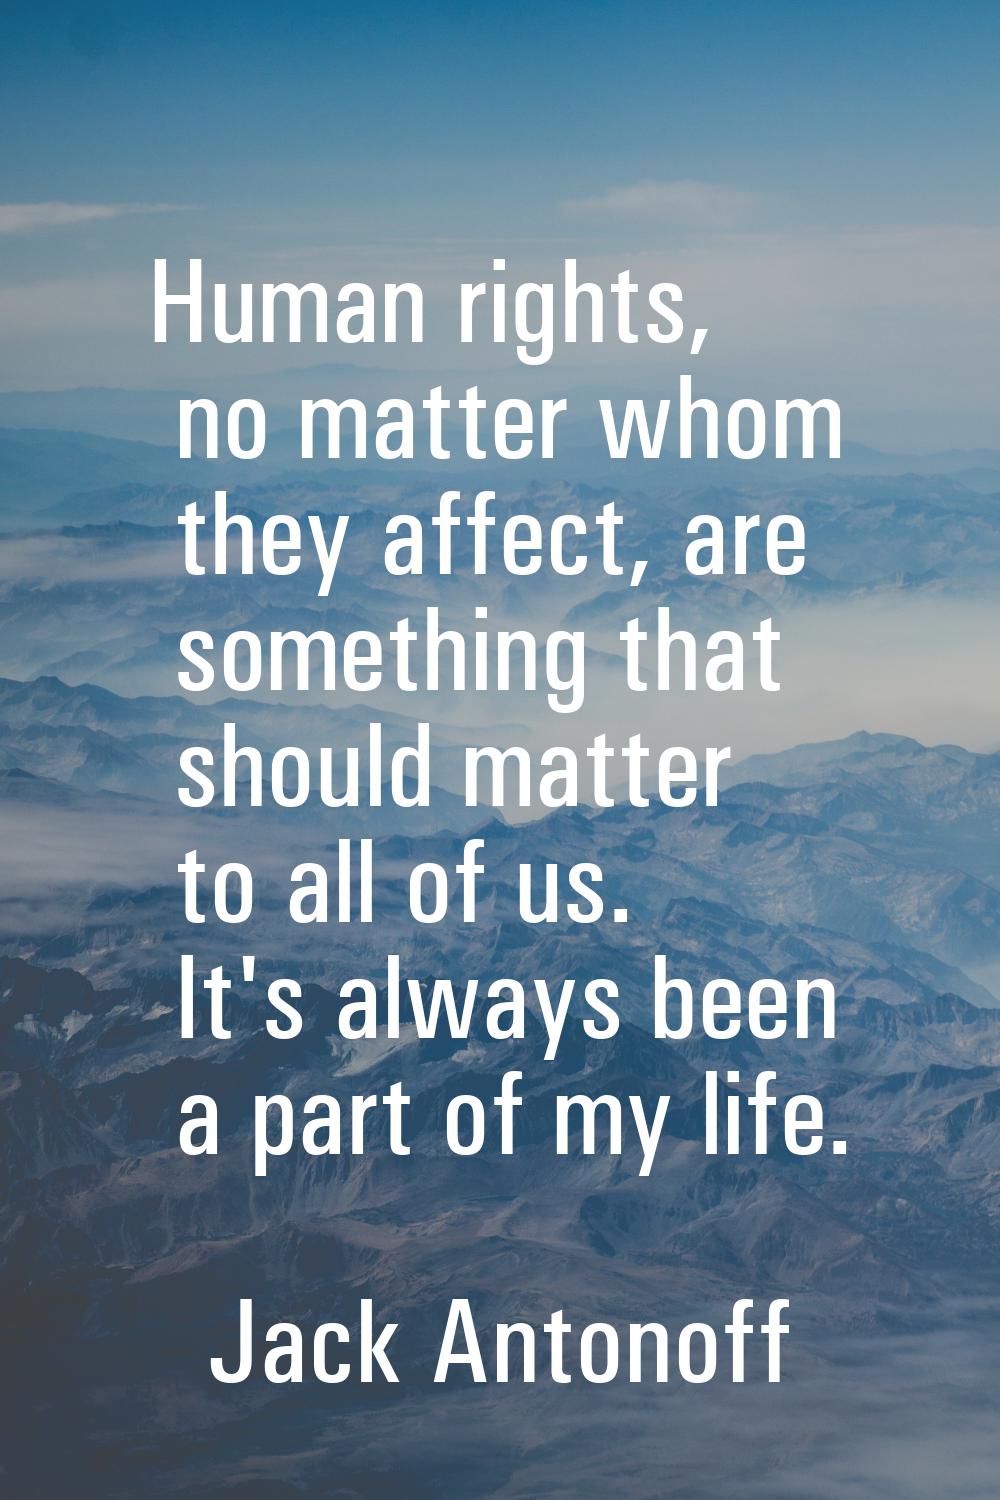 Human rights, no matter whom they affect, are something that should matter to all of us. It's alway